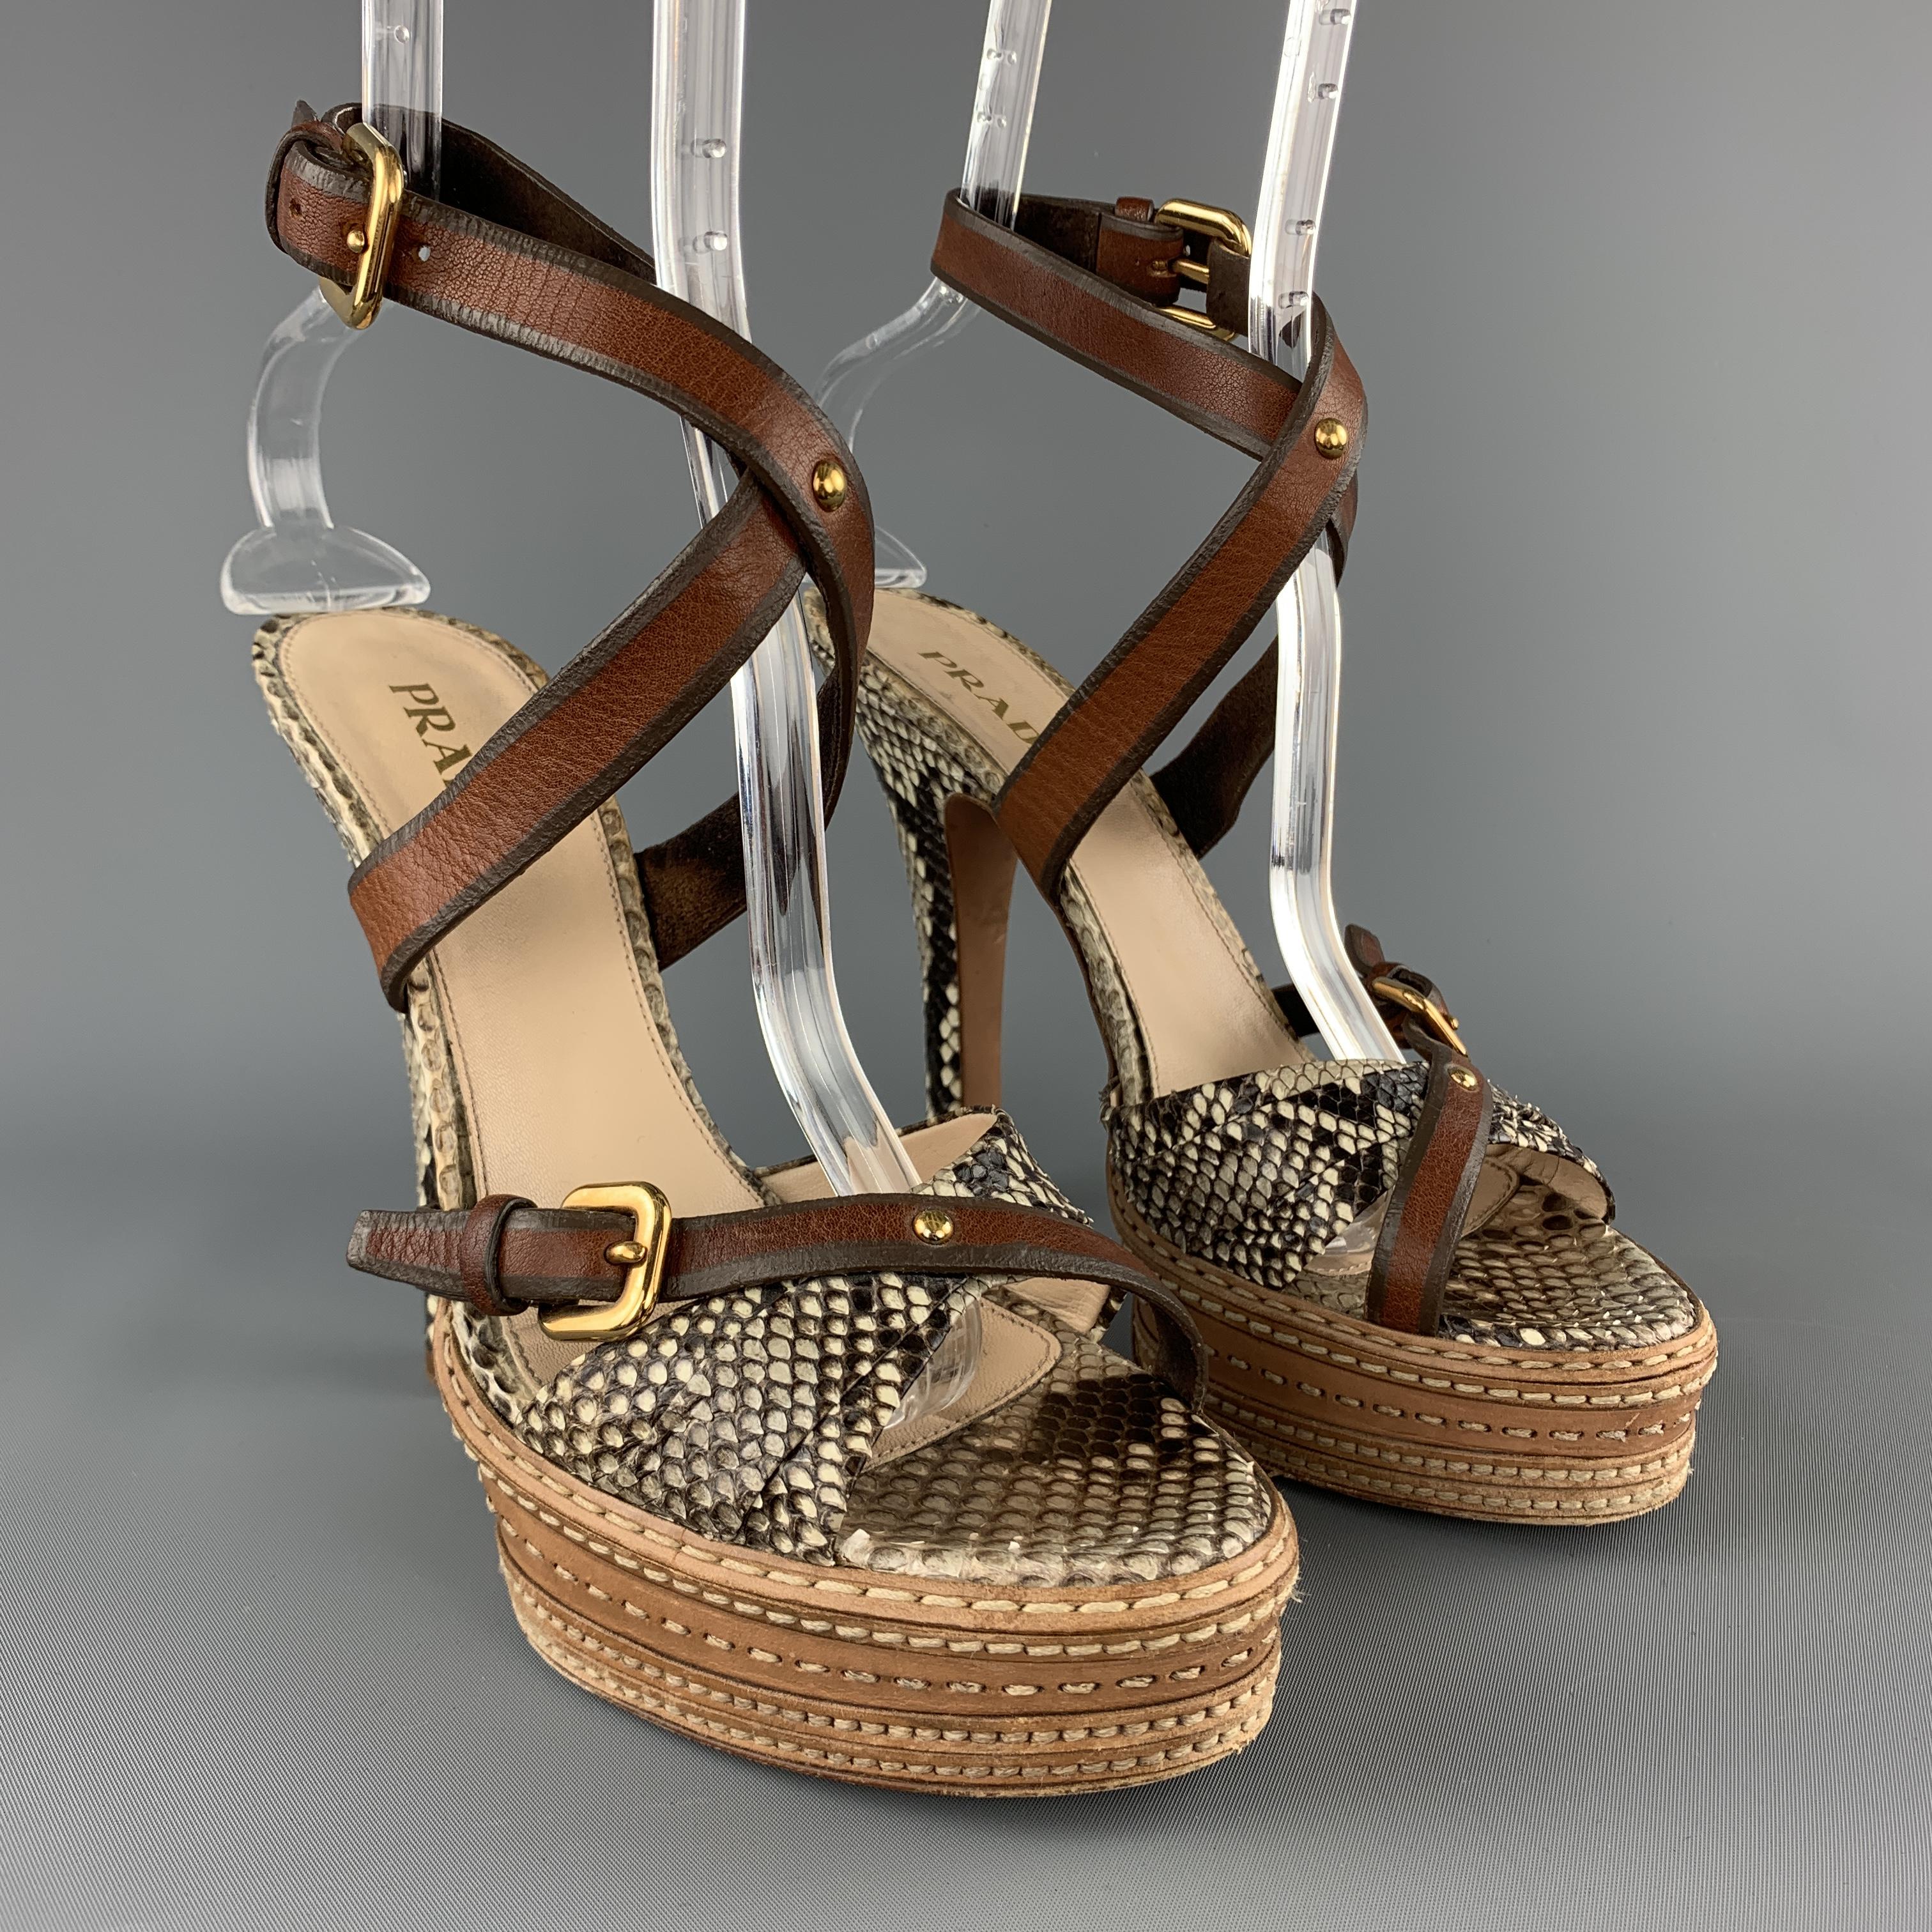 PRADA runway sandals come in gray python skin leather ad feature a chunky covered heel, stacked beige leather panel platform, crossed toe strap, and brown leather ankle strap. Made in Italy.

Good Pre-Owned Condition.
Marked: IT